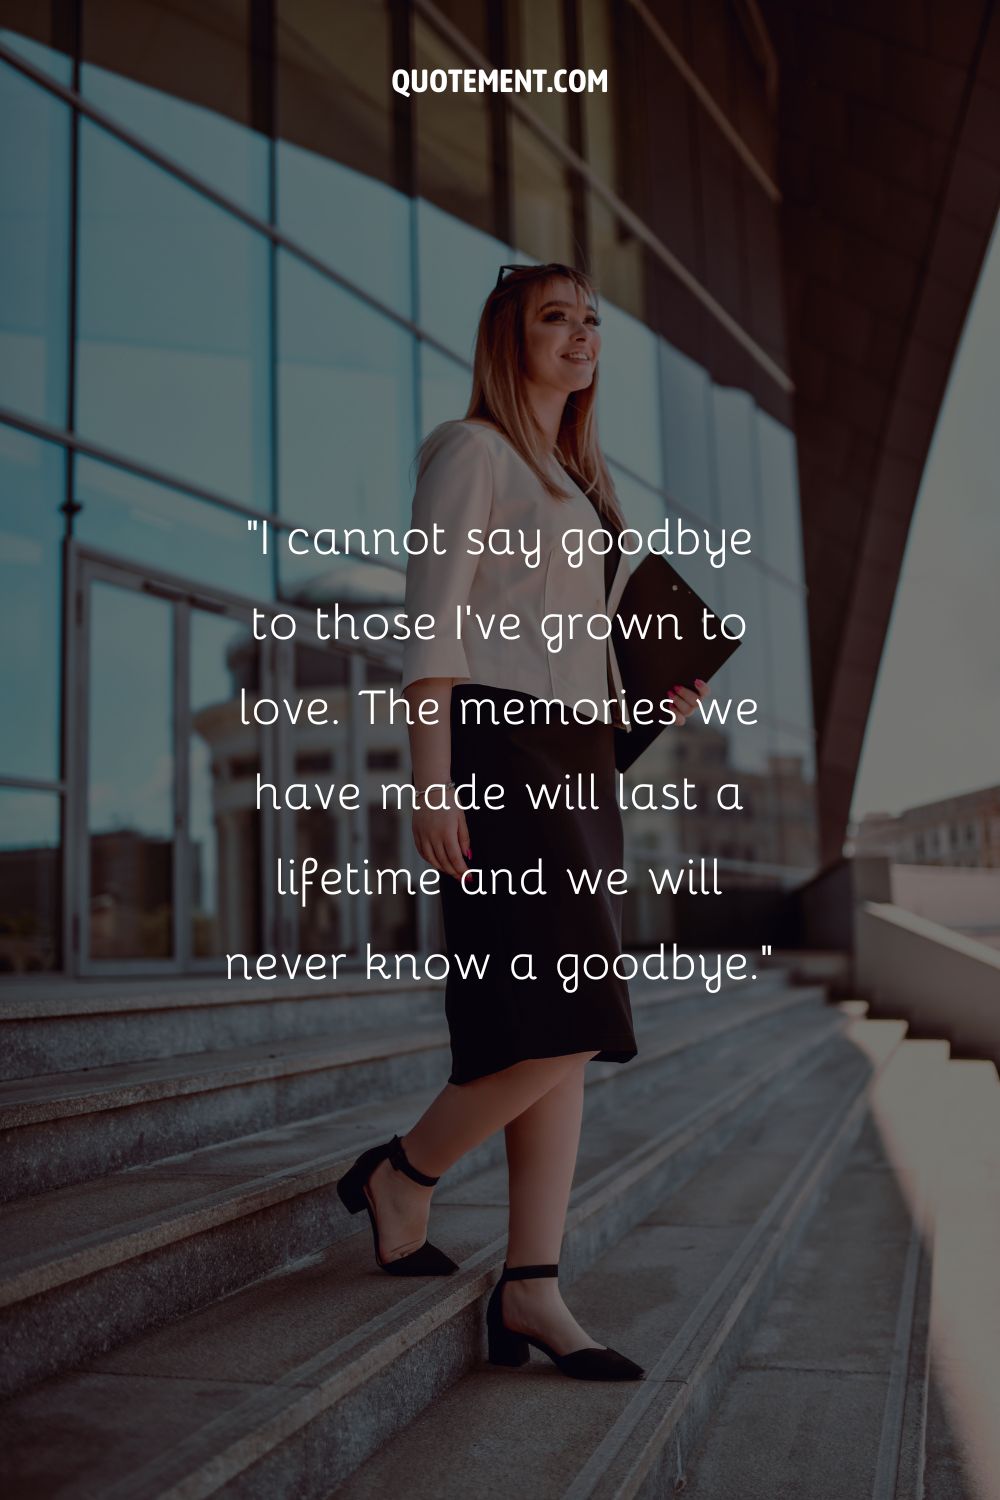 A woman standing on stairs representing the top short goodbye message leaving company
